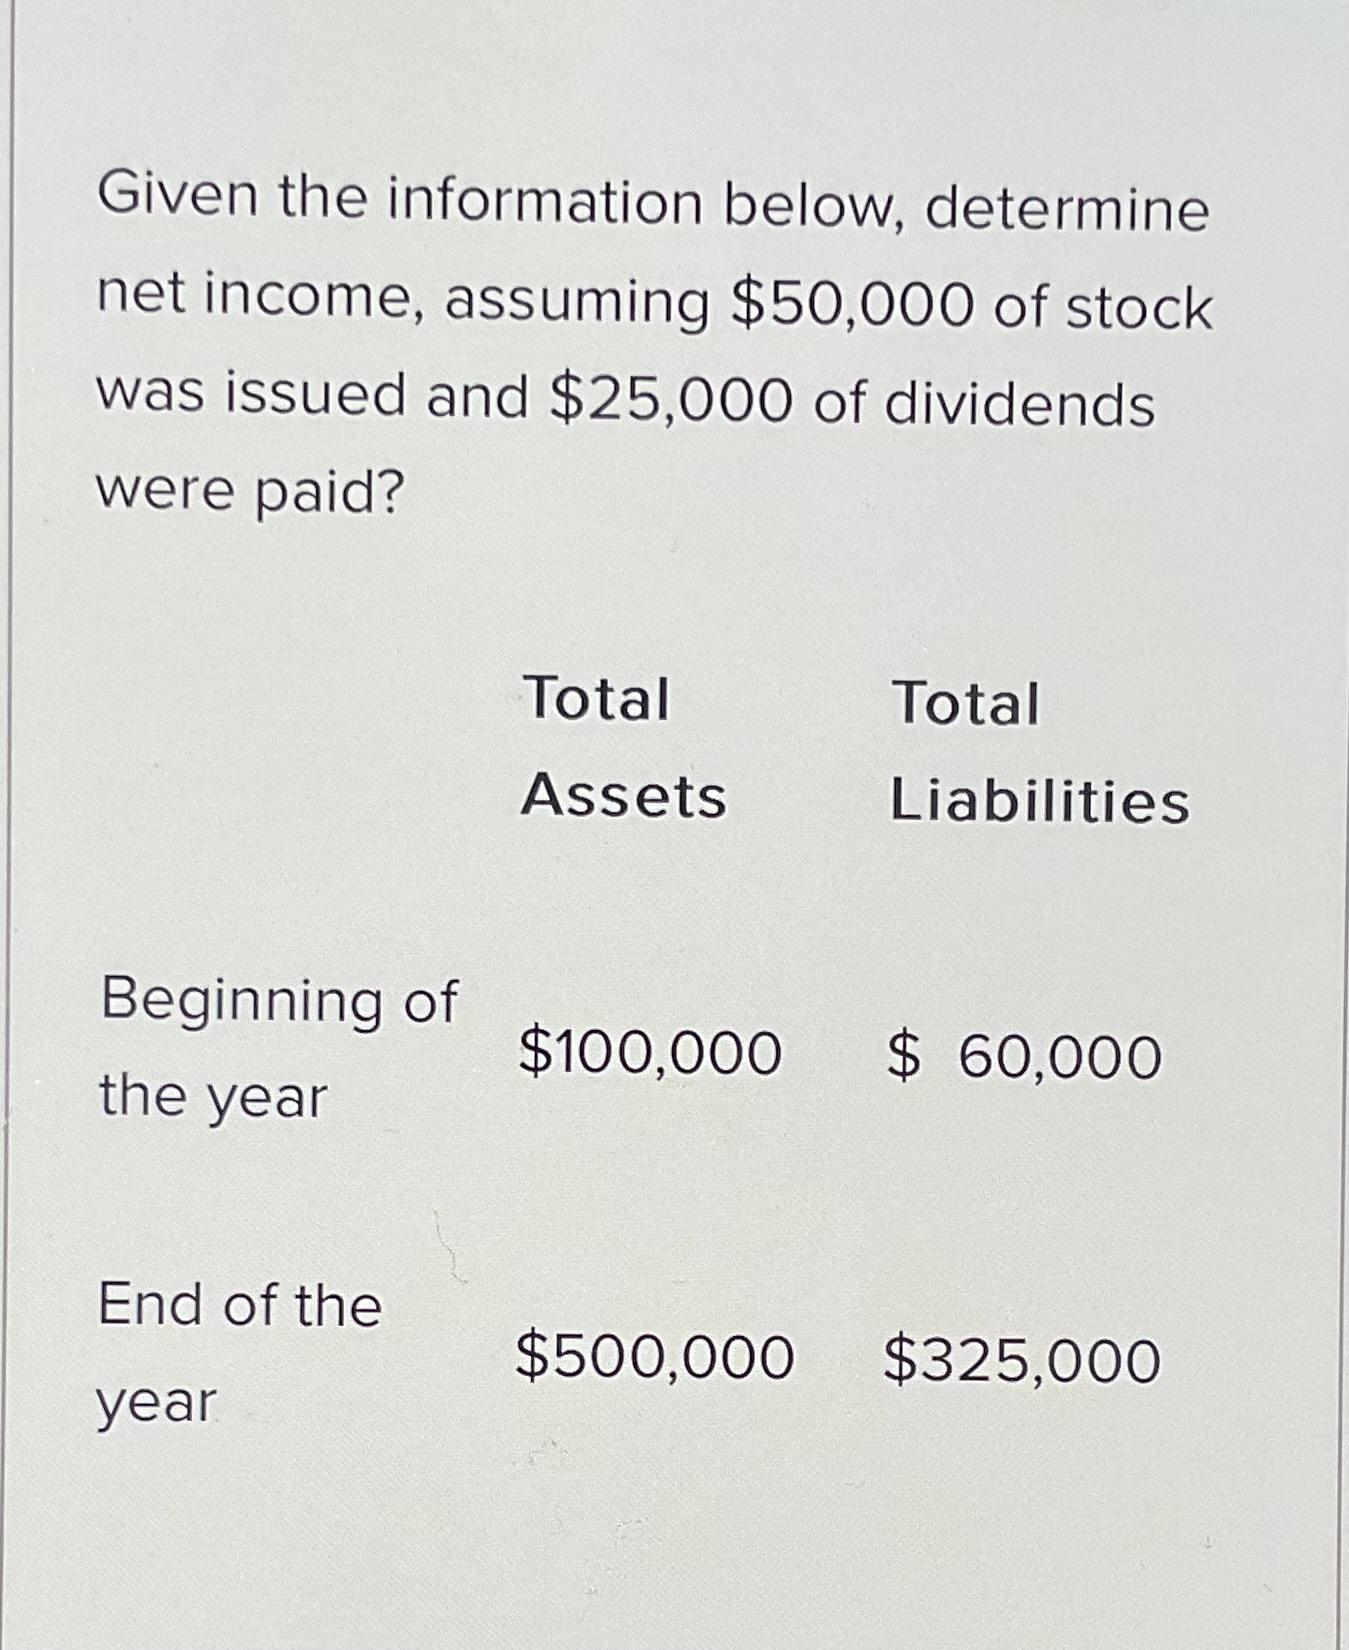 Given the information below, determine net income, assuming $50,000 of stock was issued and $25,000 of